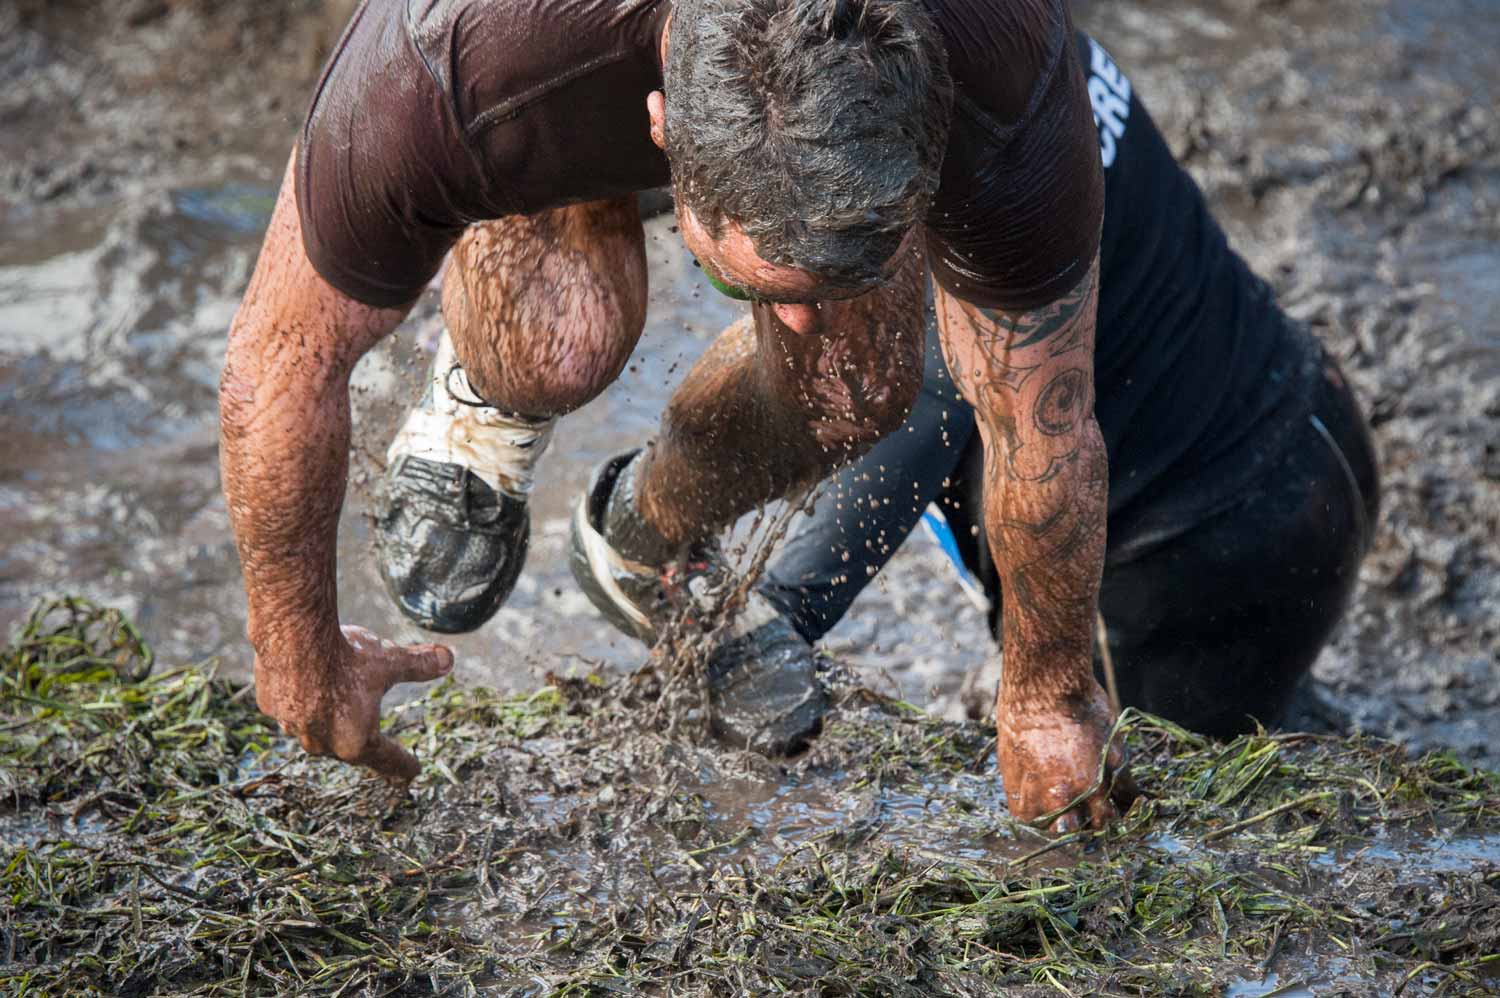 Climbing out of the first mud bath.